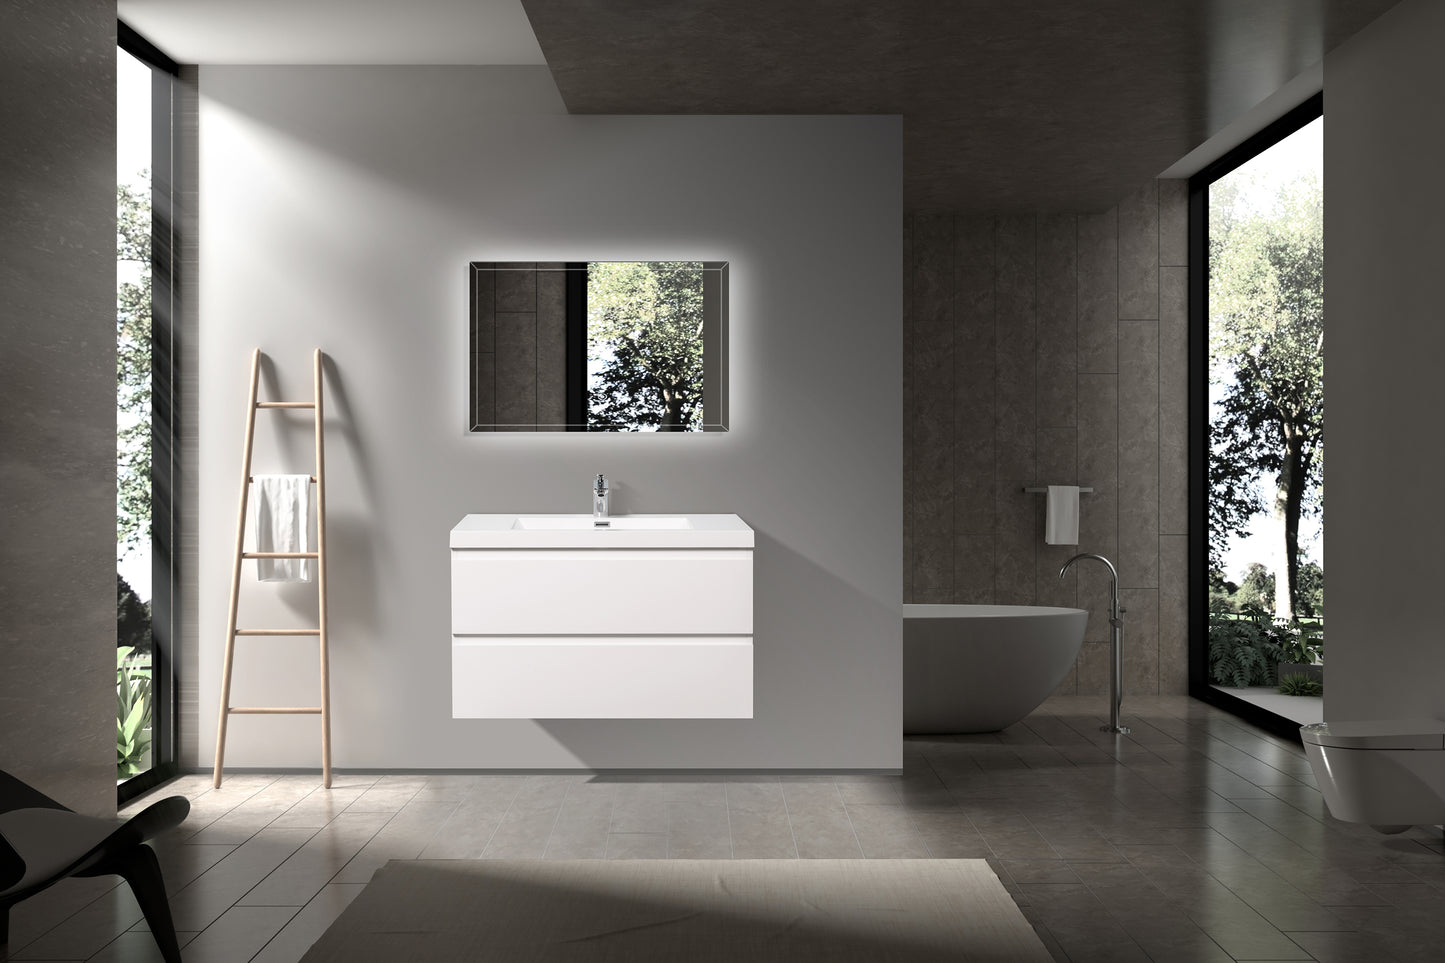 Newport Modern Design White Bathroom Furniture Set with Cabinet and Basin